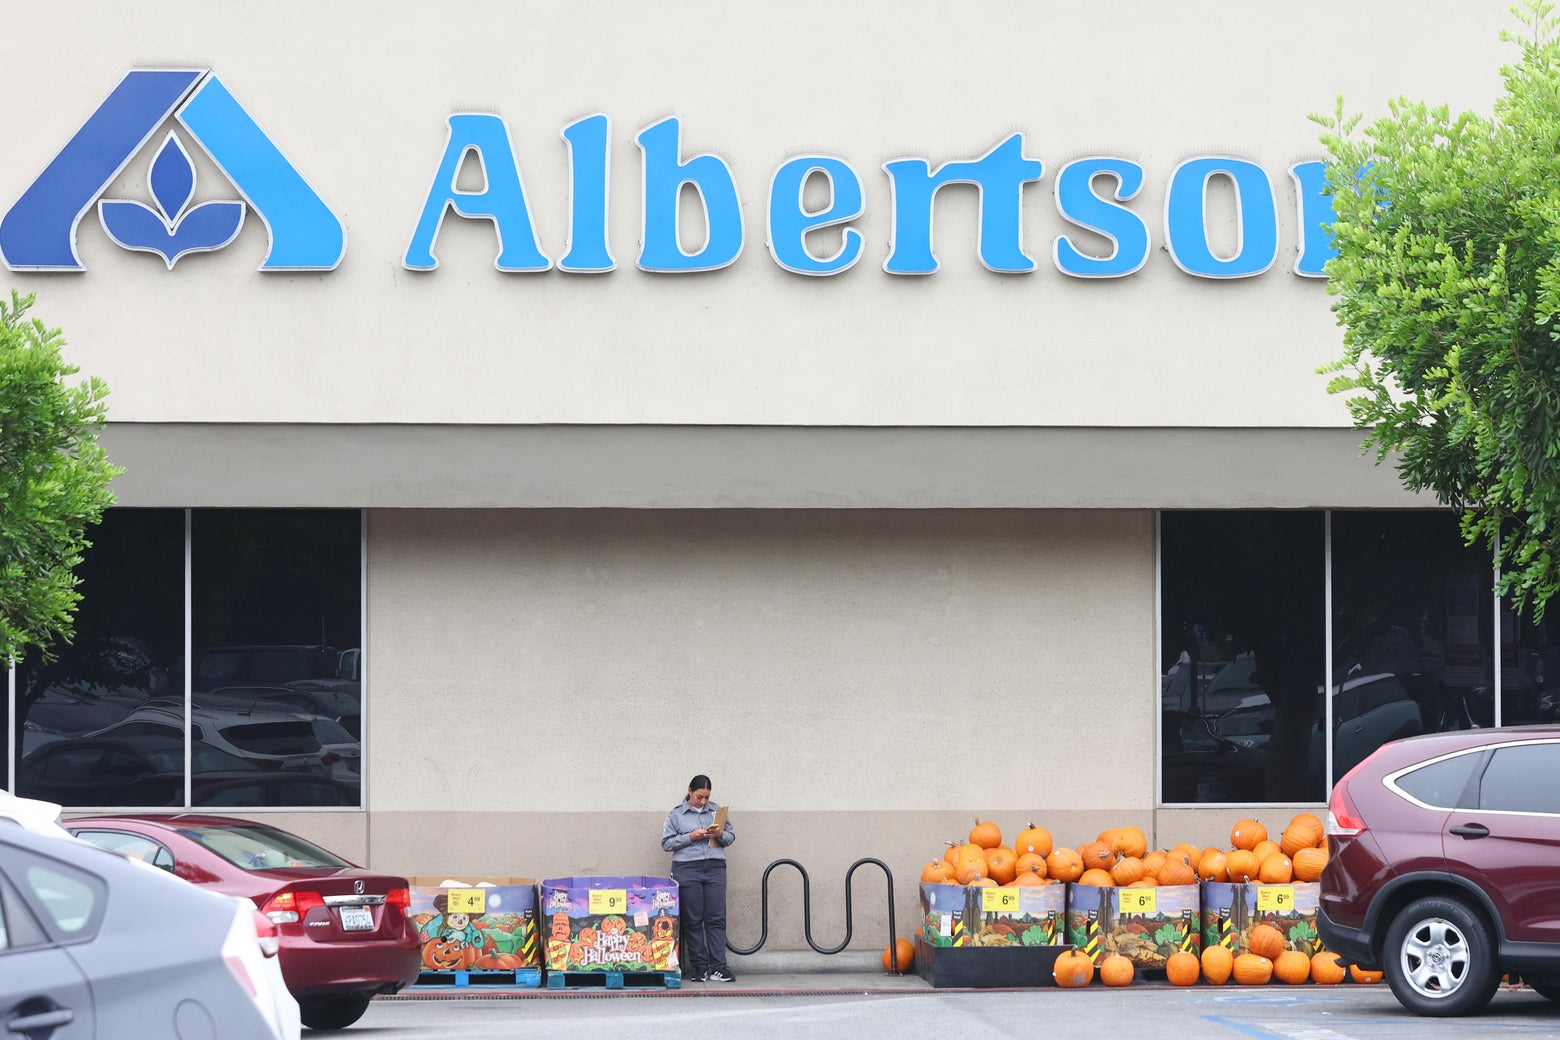 Private equity firms tried to shoplift $4 billion from Albertsons before selling it to Kroger until a judge stopped them. – Slate